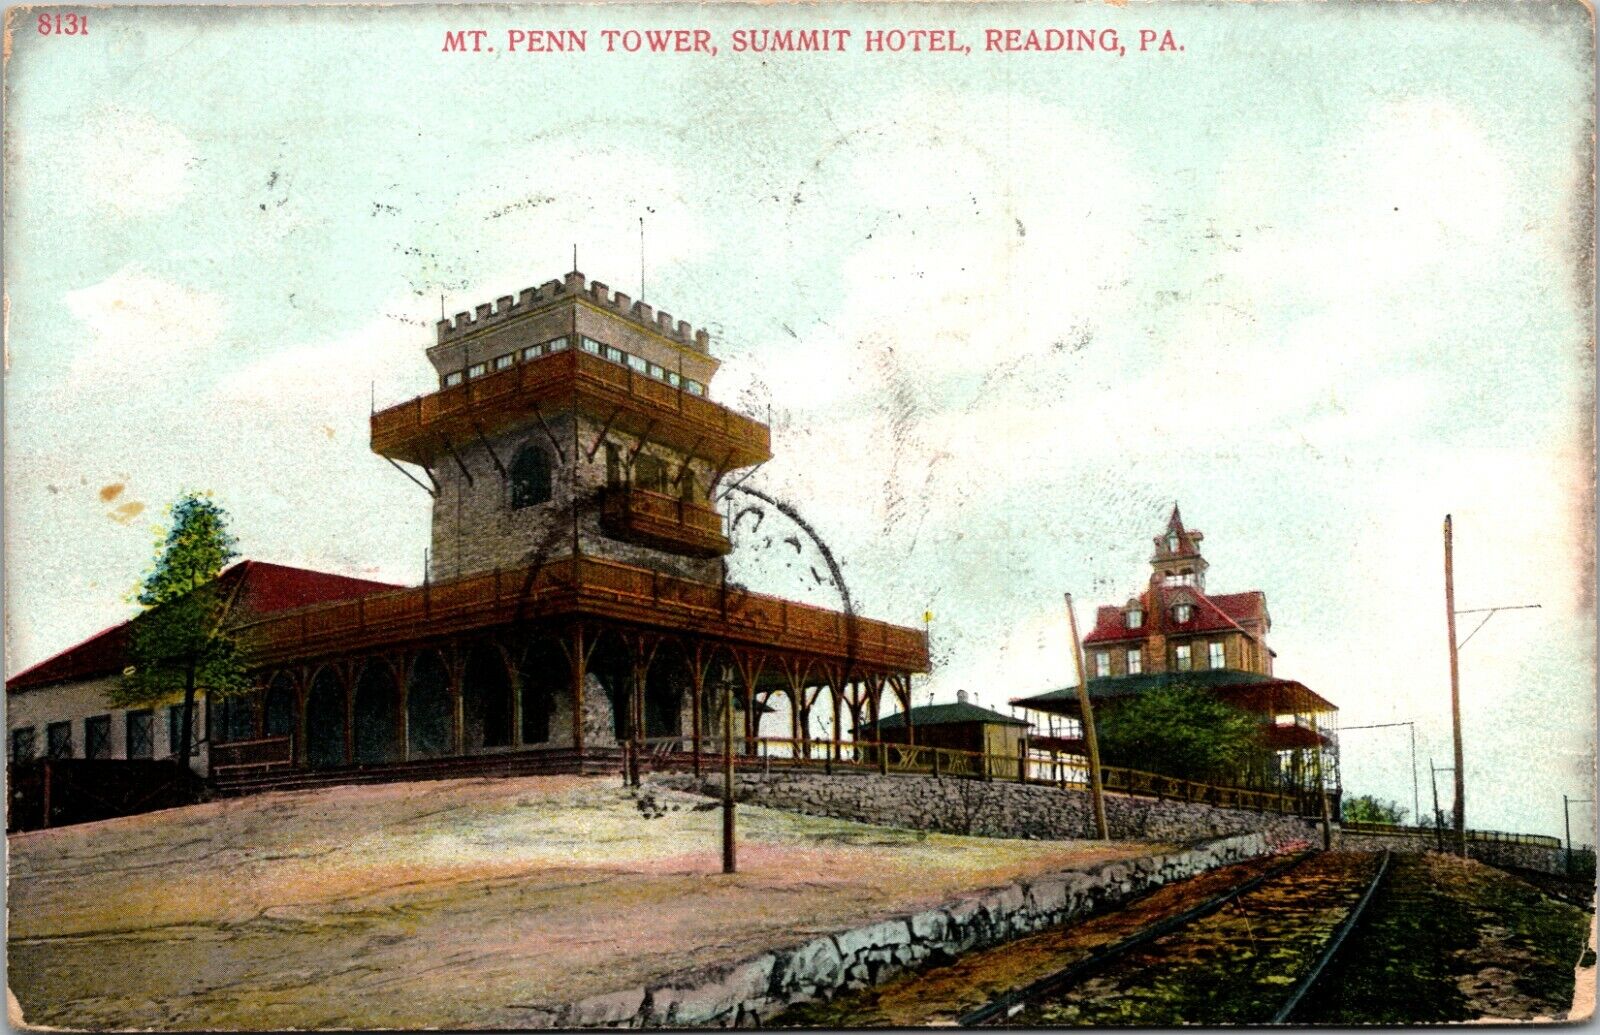 ANTIQUE POSTCARD TOWER AND HOTEL ON MOUNT PENN READING PA 